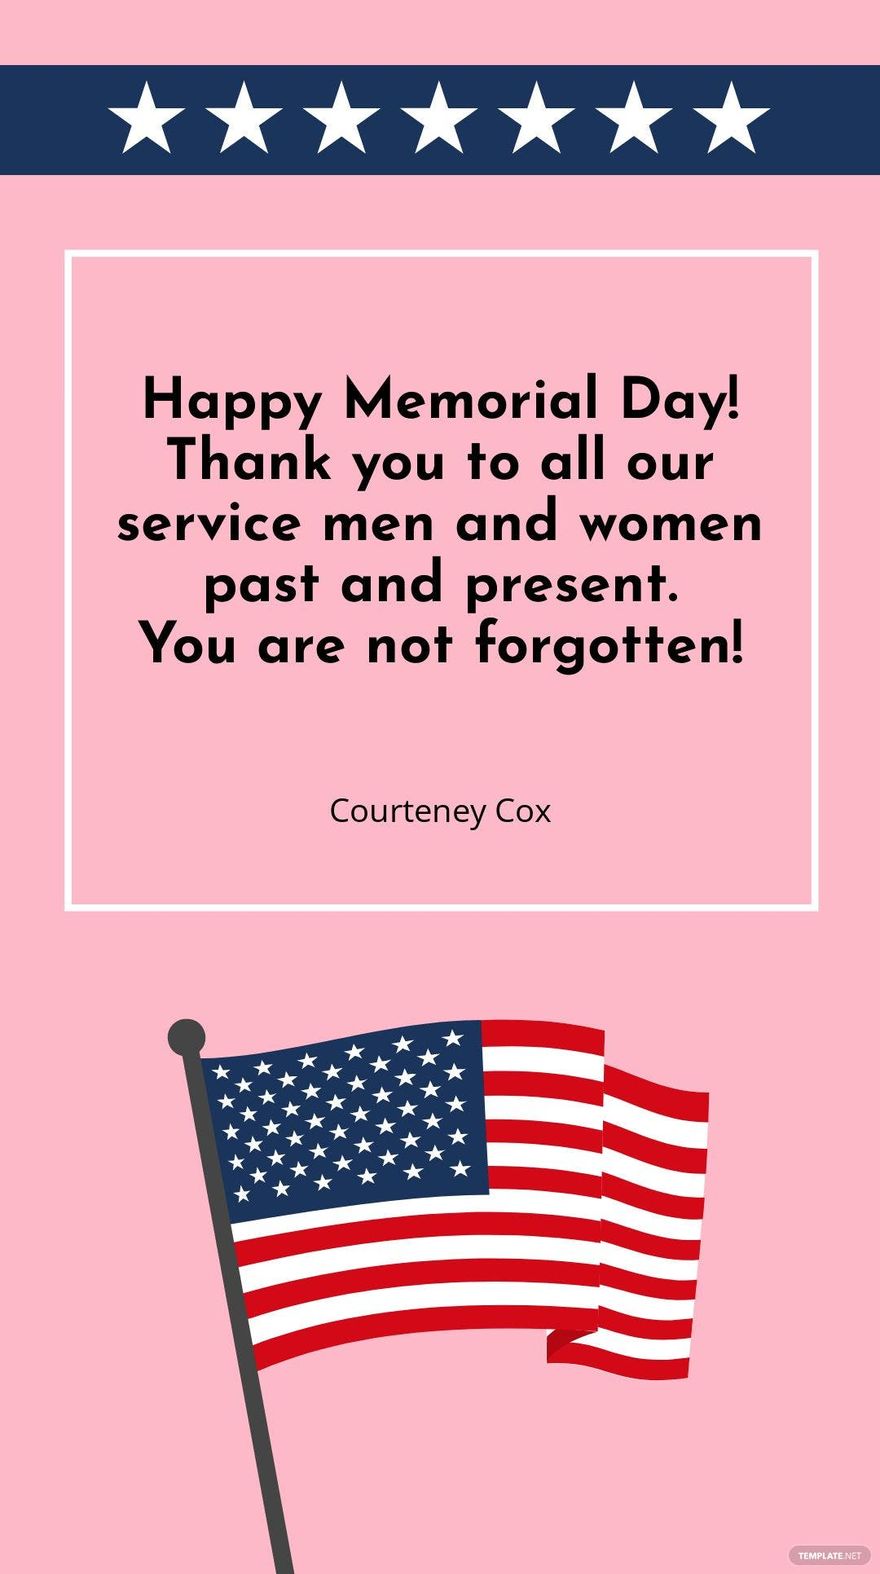 Courteney Cox - Happy Memorial Day! Thank you to all our service men and women past and present. You are not forgotten!